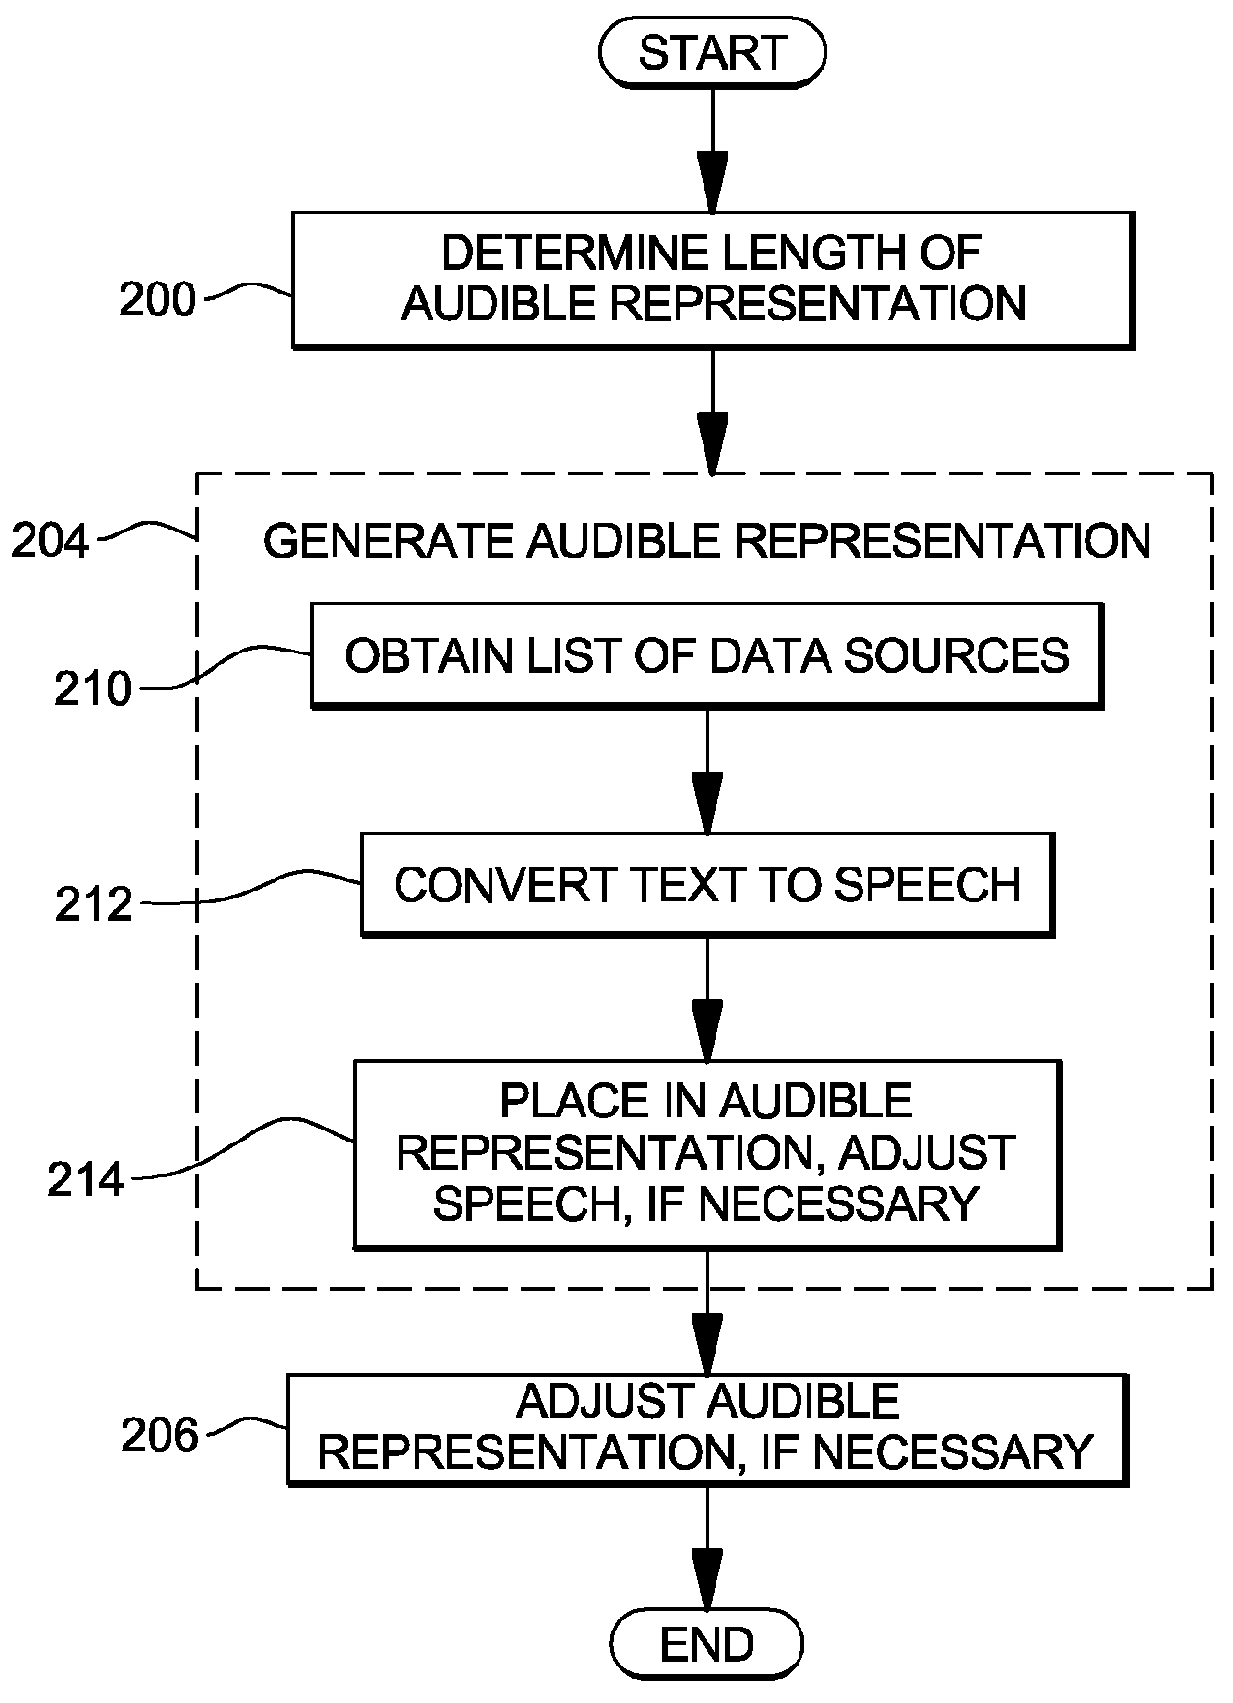 Automatically generating audible representations of data content based on user preferences